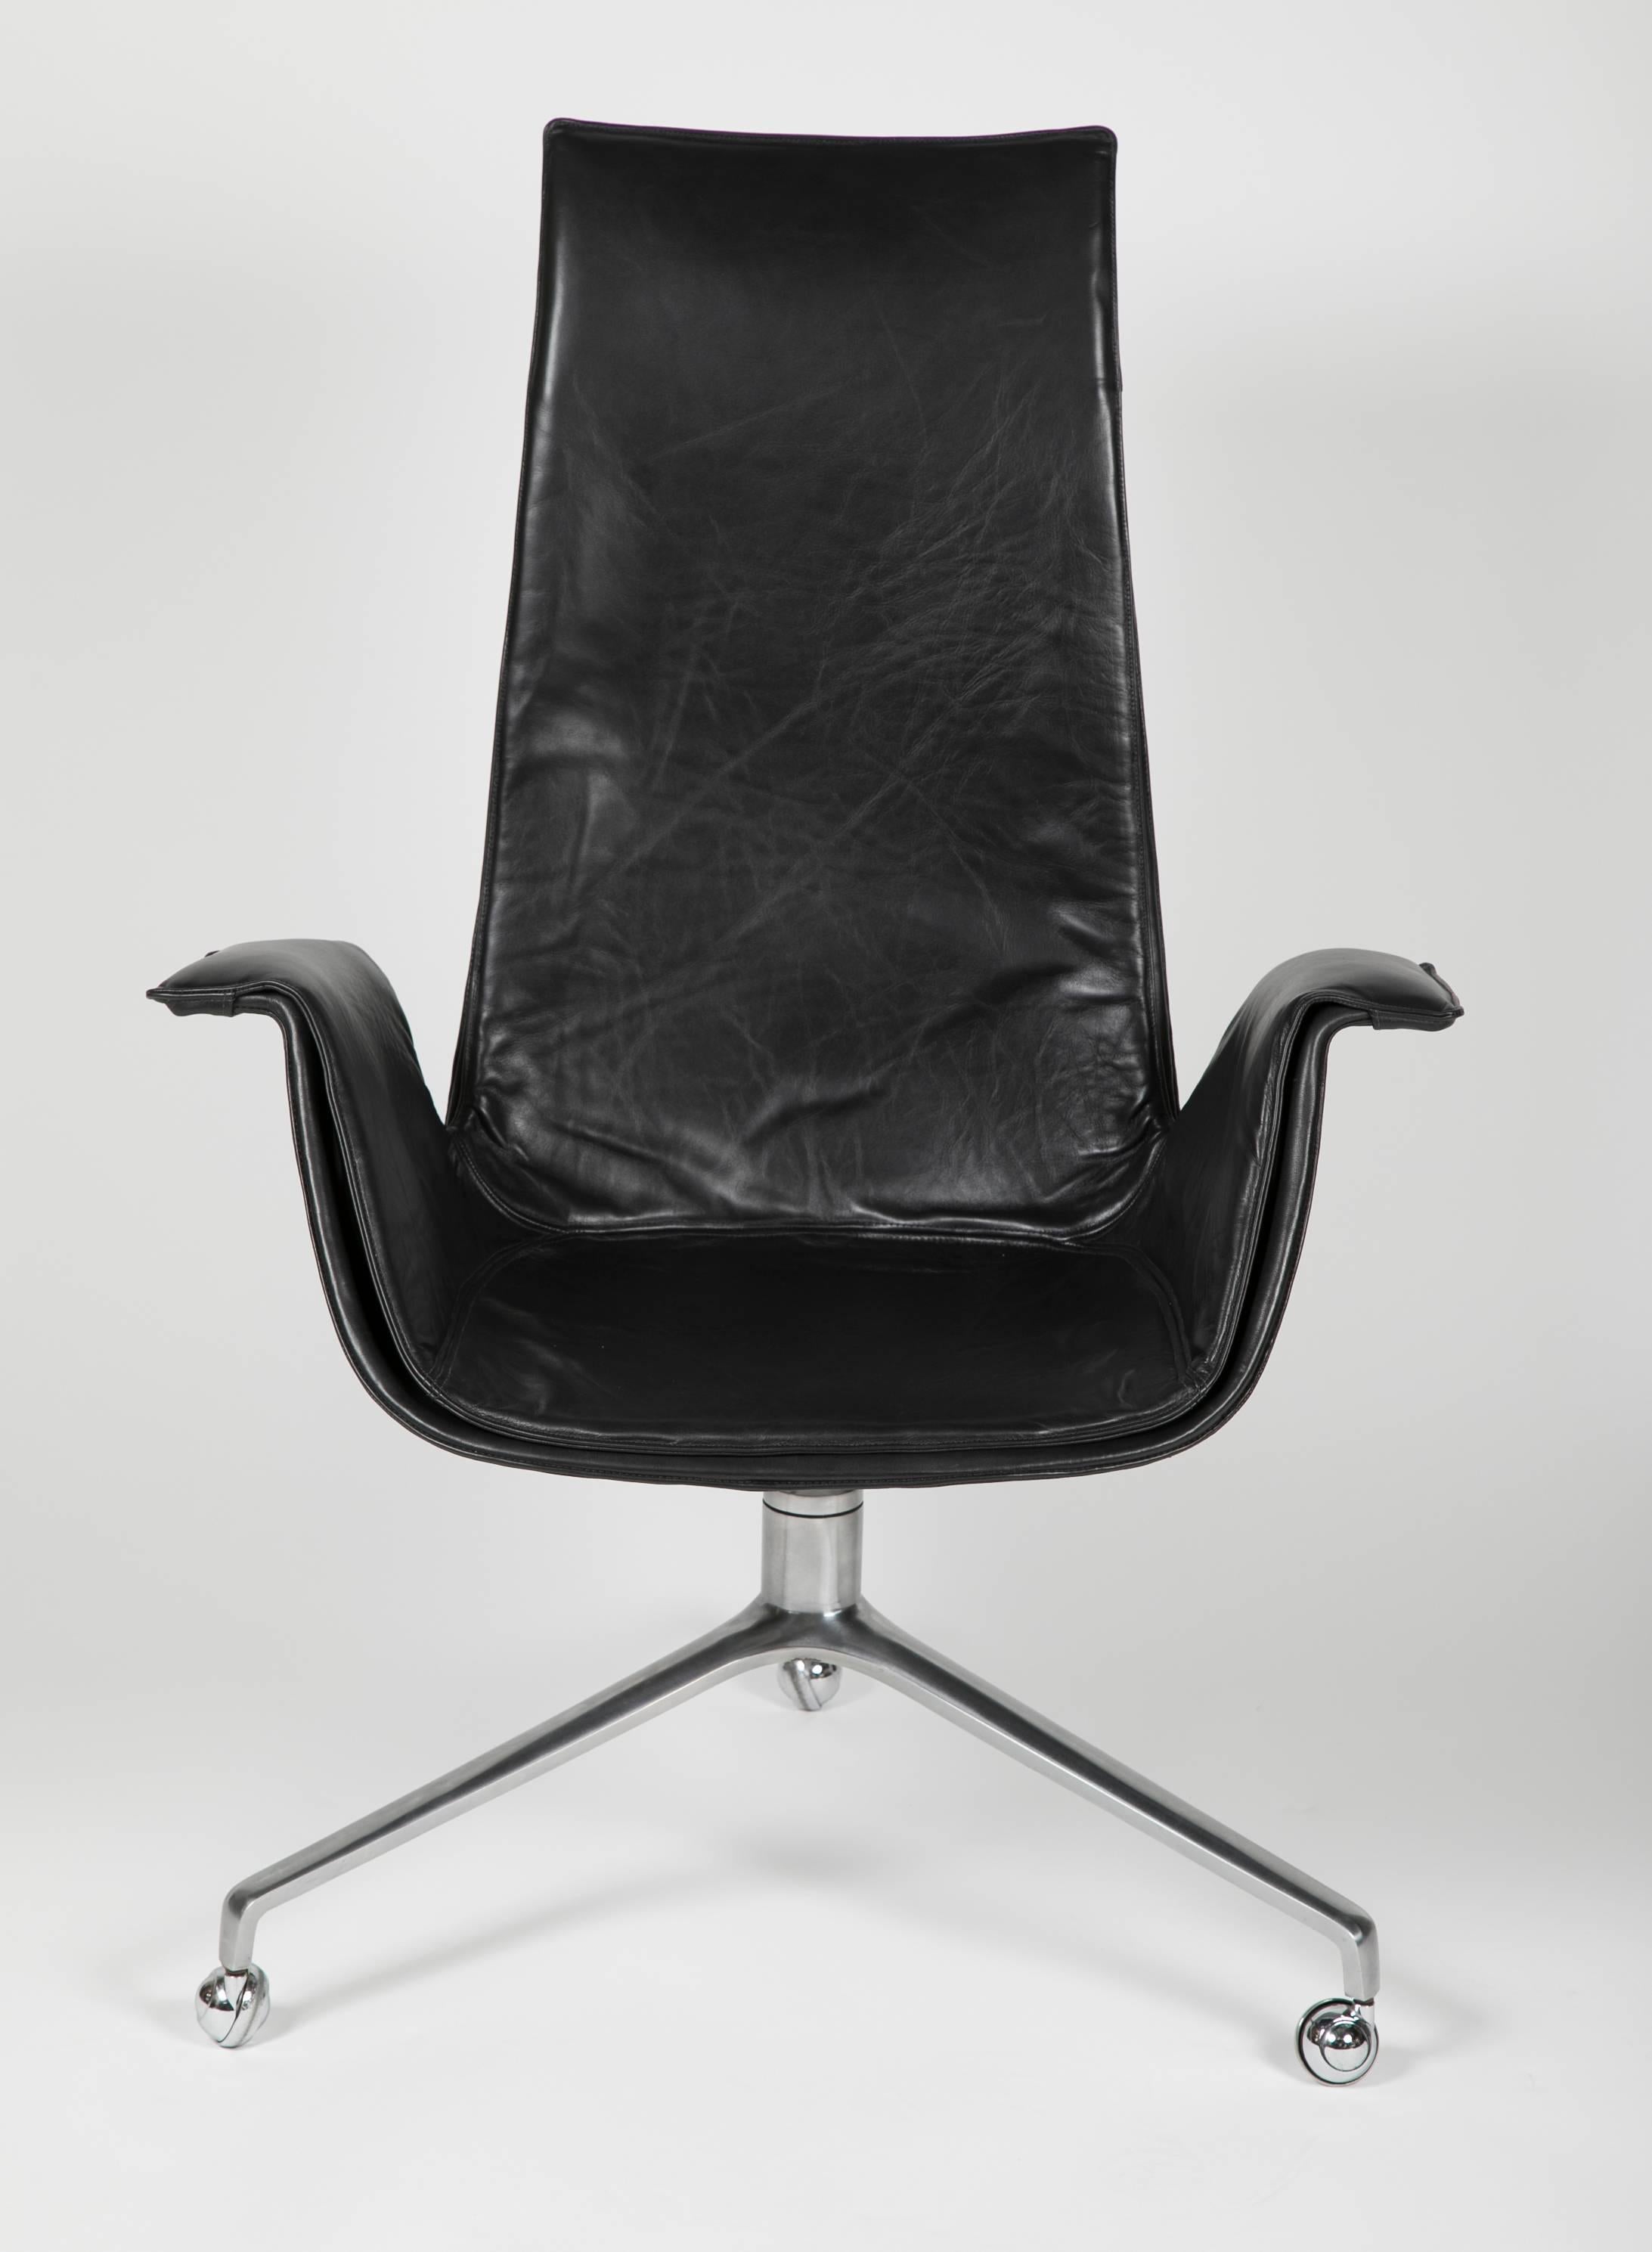 A Bird chair by Jorgen Kastholm and Preben Fabricius for Alfred Kill. This desk chair model has the rarer Casters. Newly recovered in black Sorensen leather.